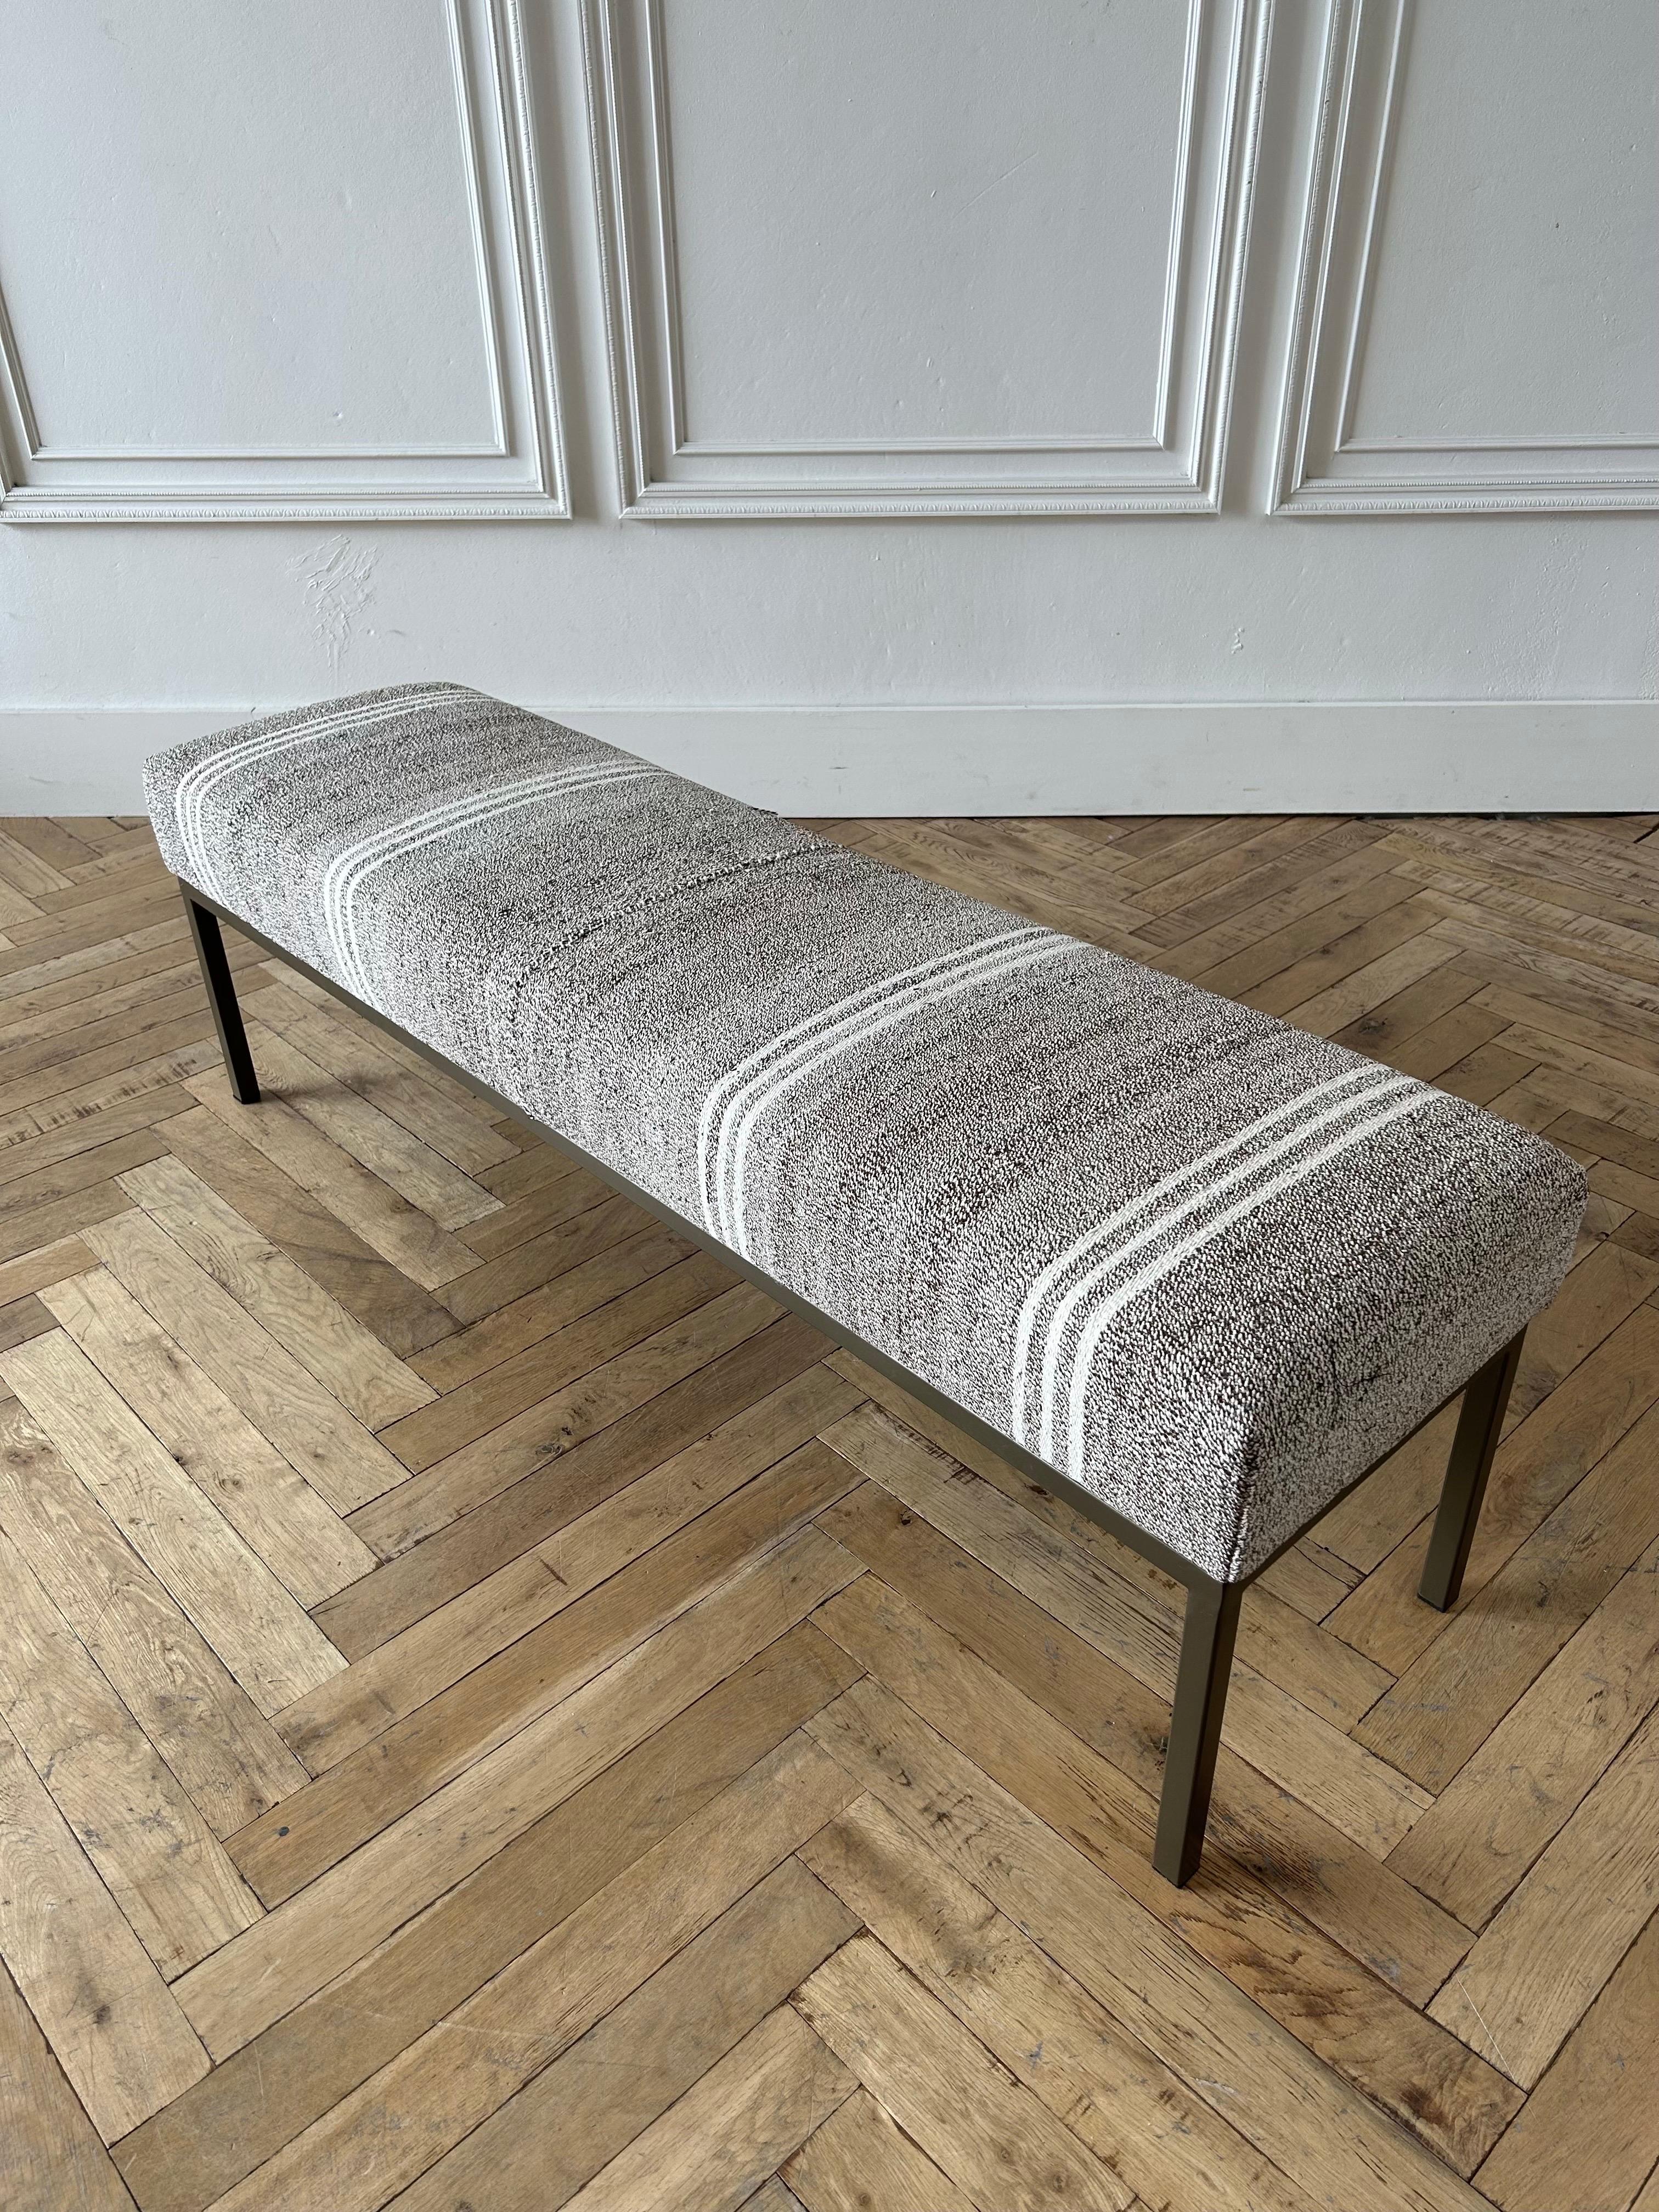 American Custom Made Upholstered Bench Ottoman from Turkish Rug